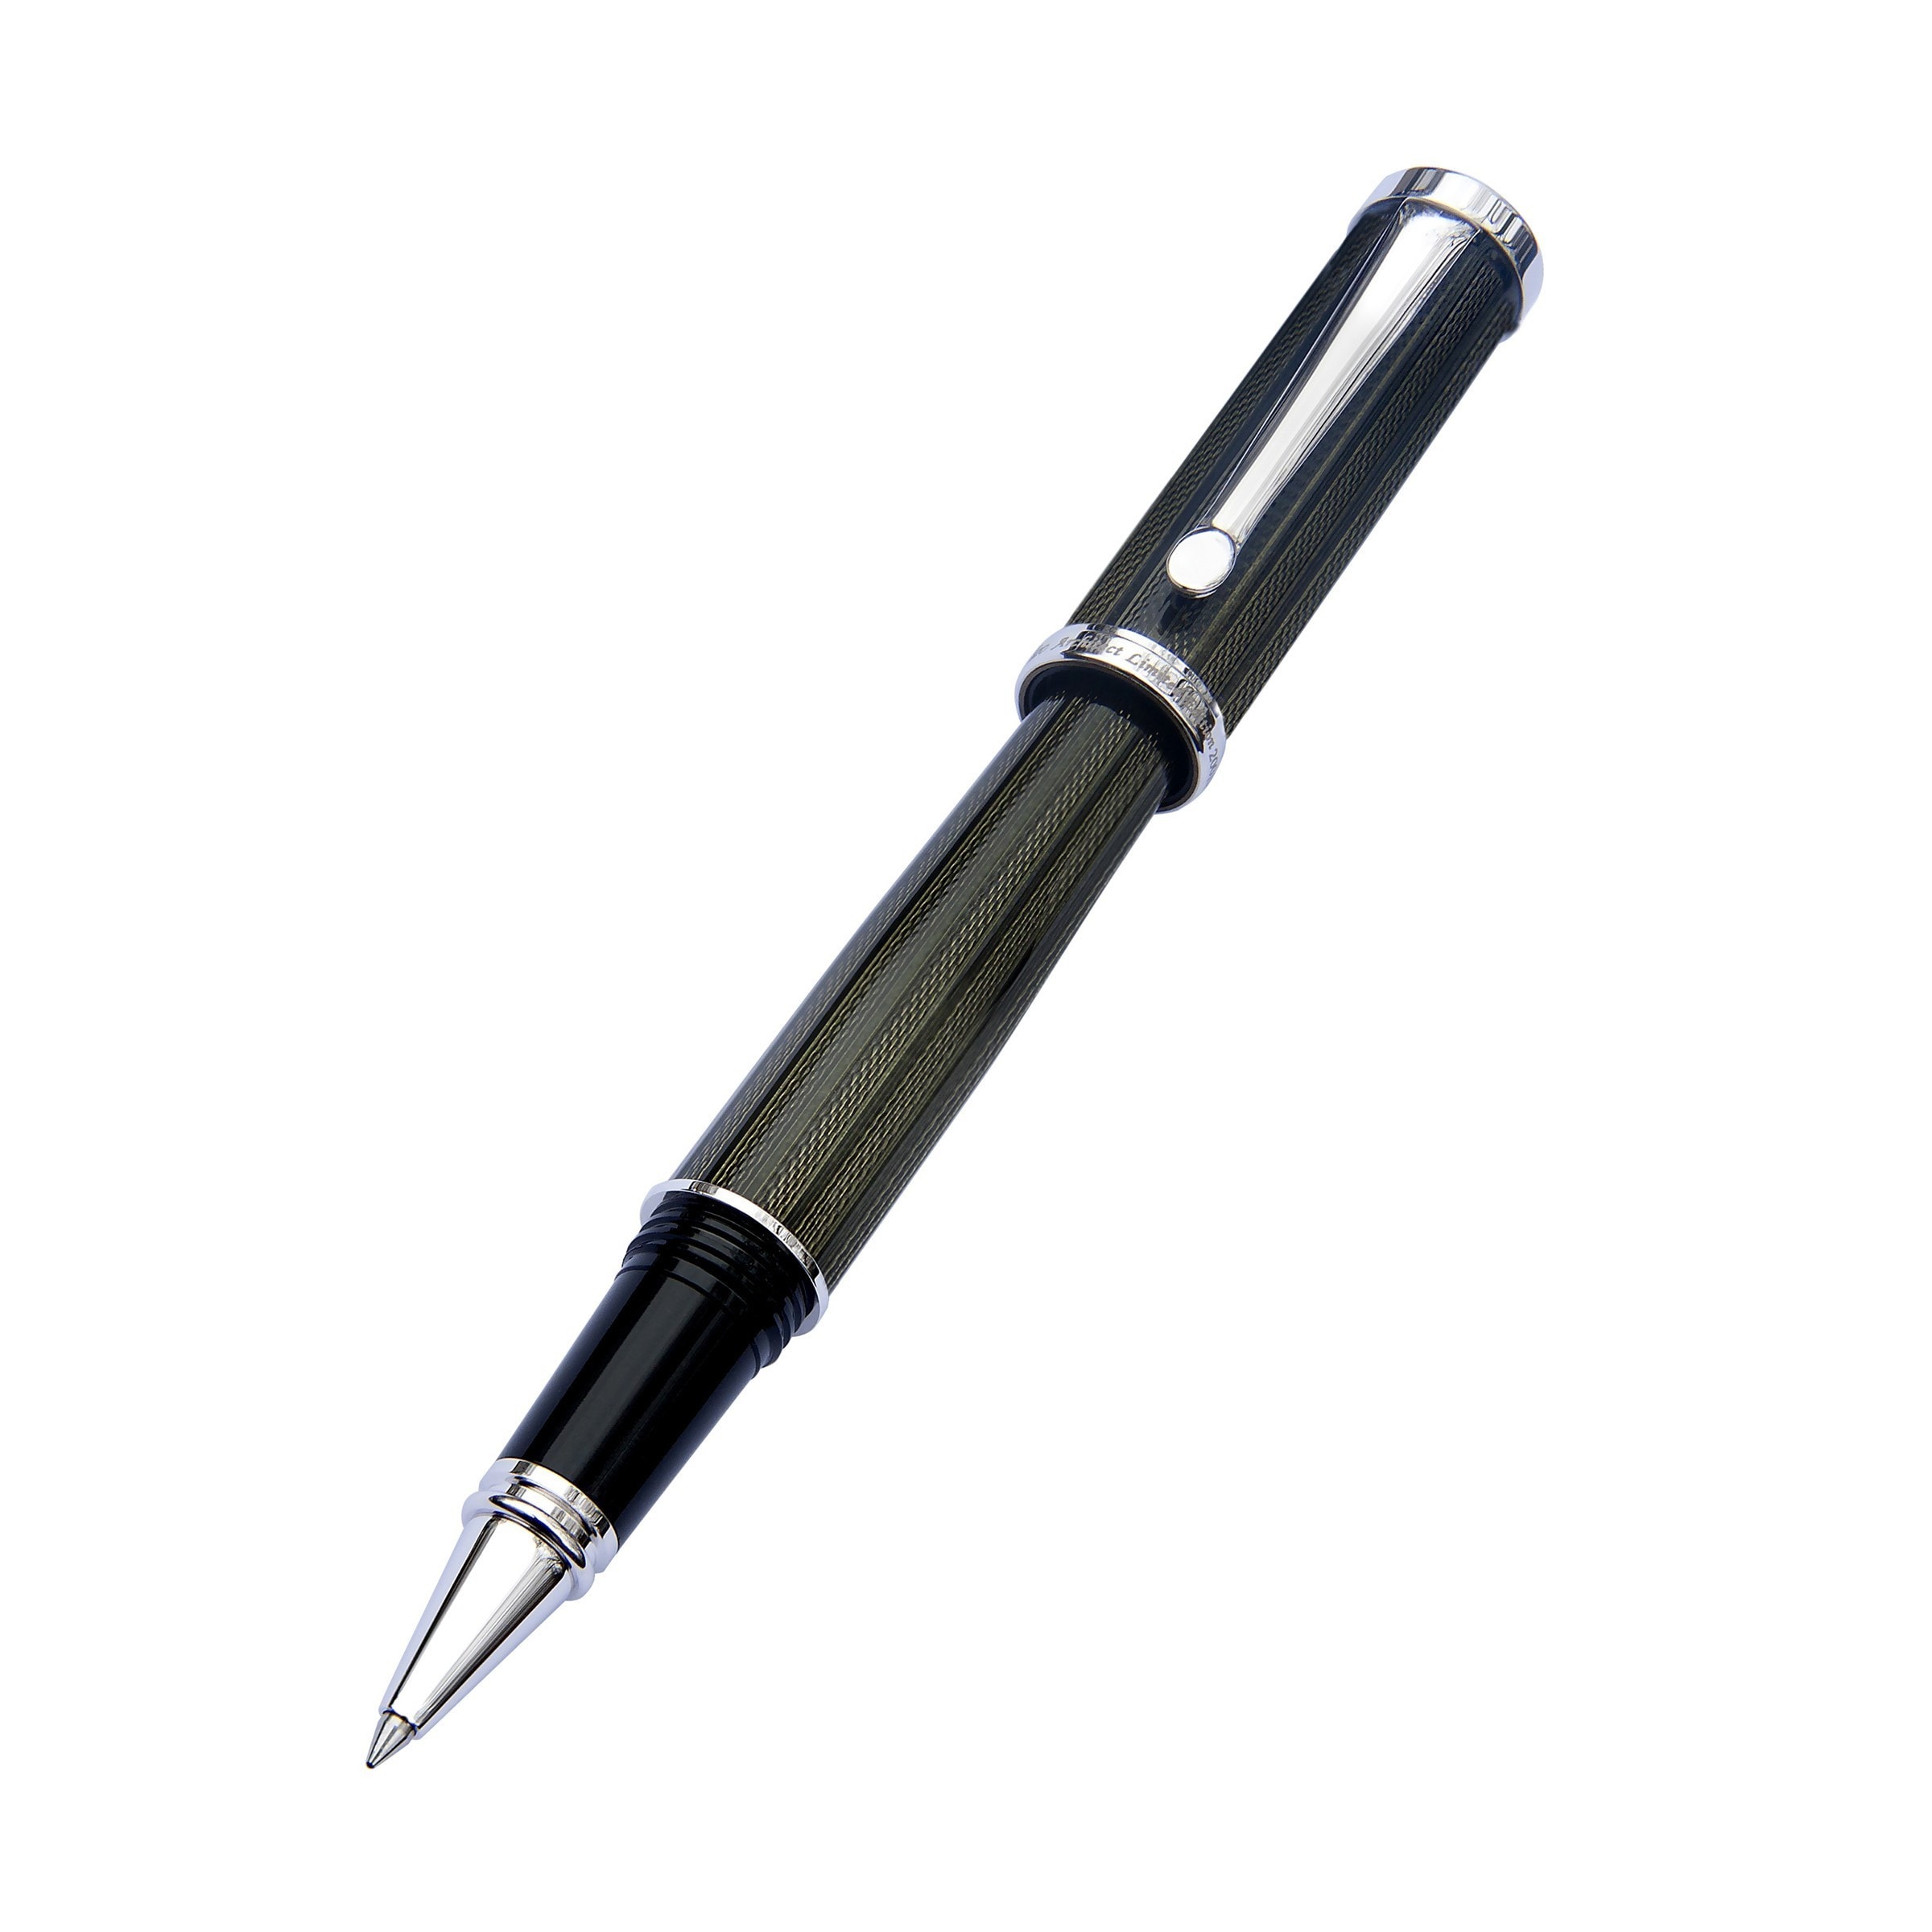 Xezo Architect Fine Executive Olive Limited Edition Roller Pen (Olive, black, platinumFeatures Hand guilloche diamond cut engraved, translucent lacquer finishMaterials Brass, platinum finish fittingsInk color BlackRefillablePoint size FineSet includes